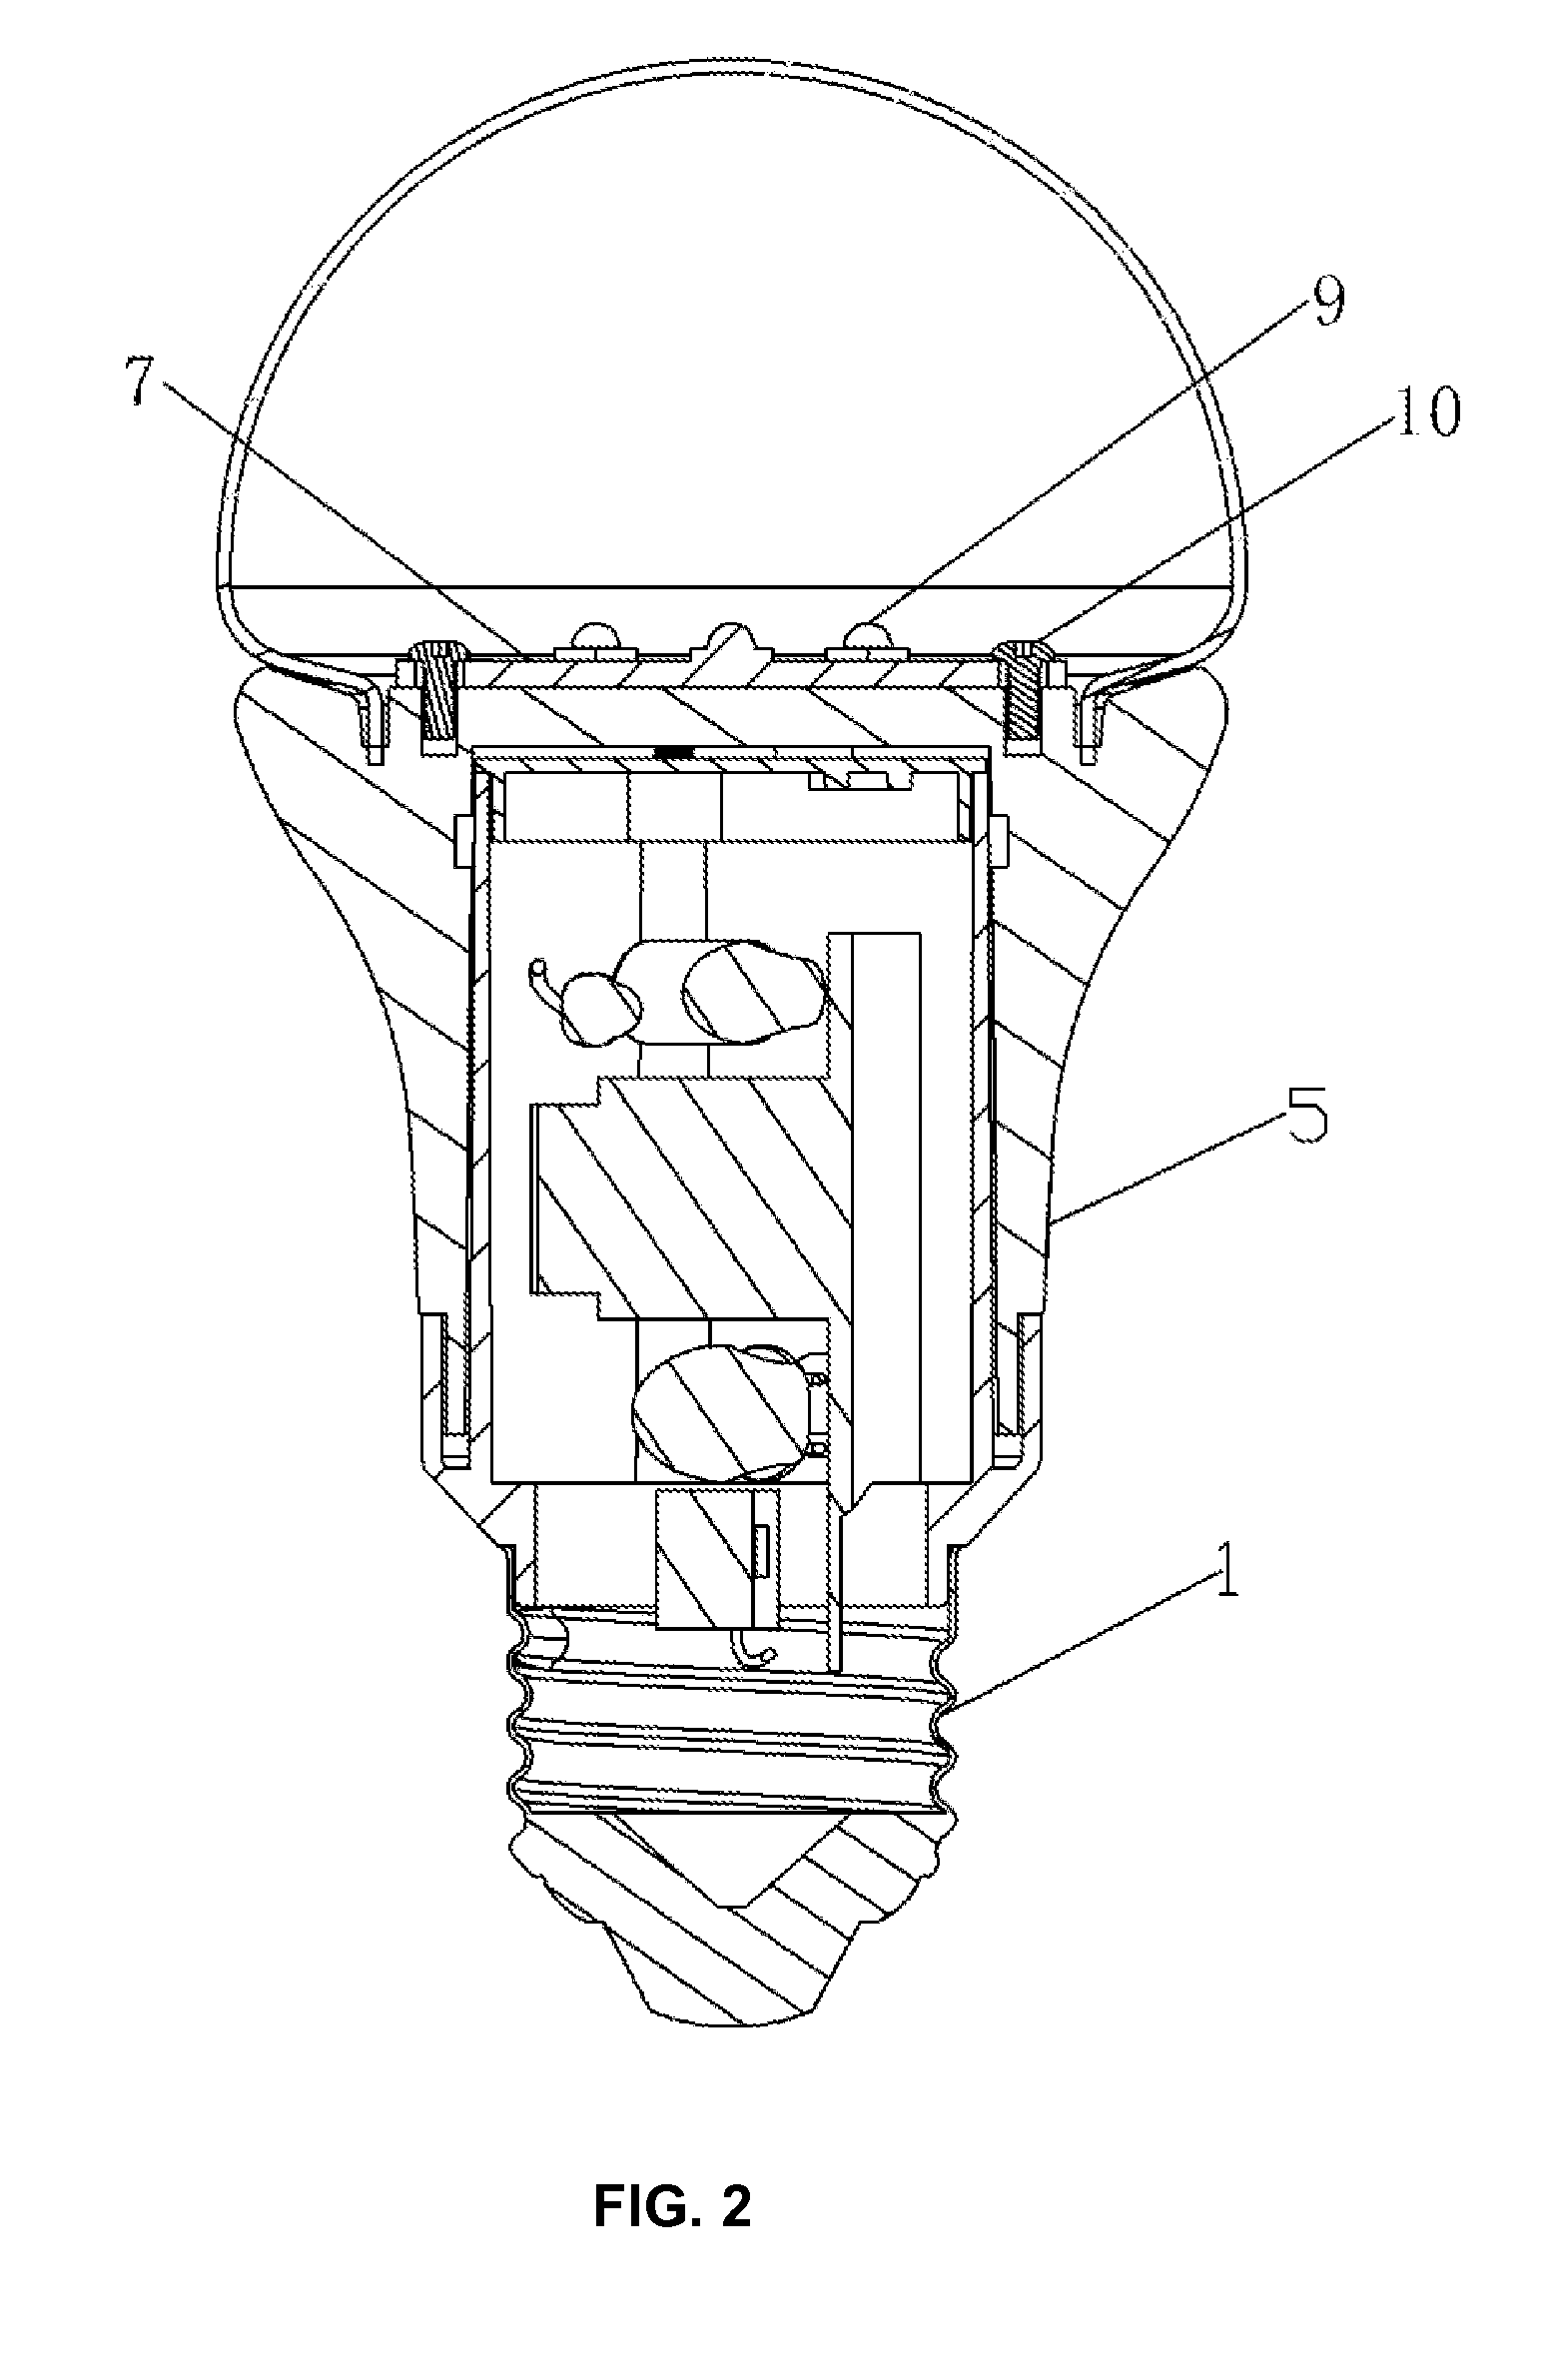 LED lighting device and method for making the same